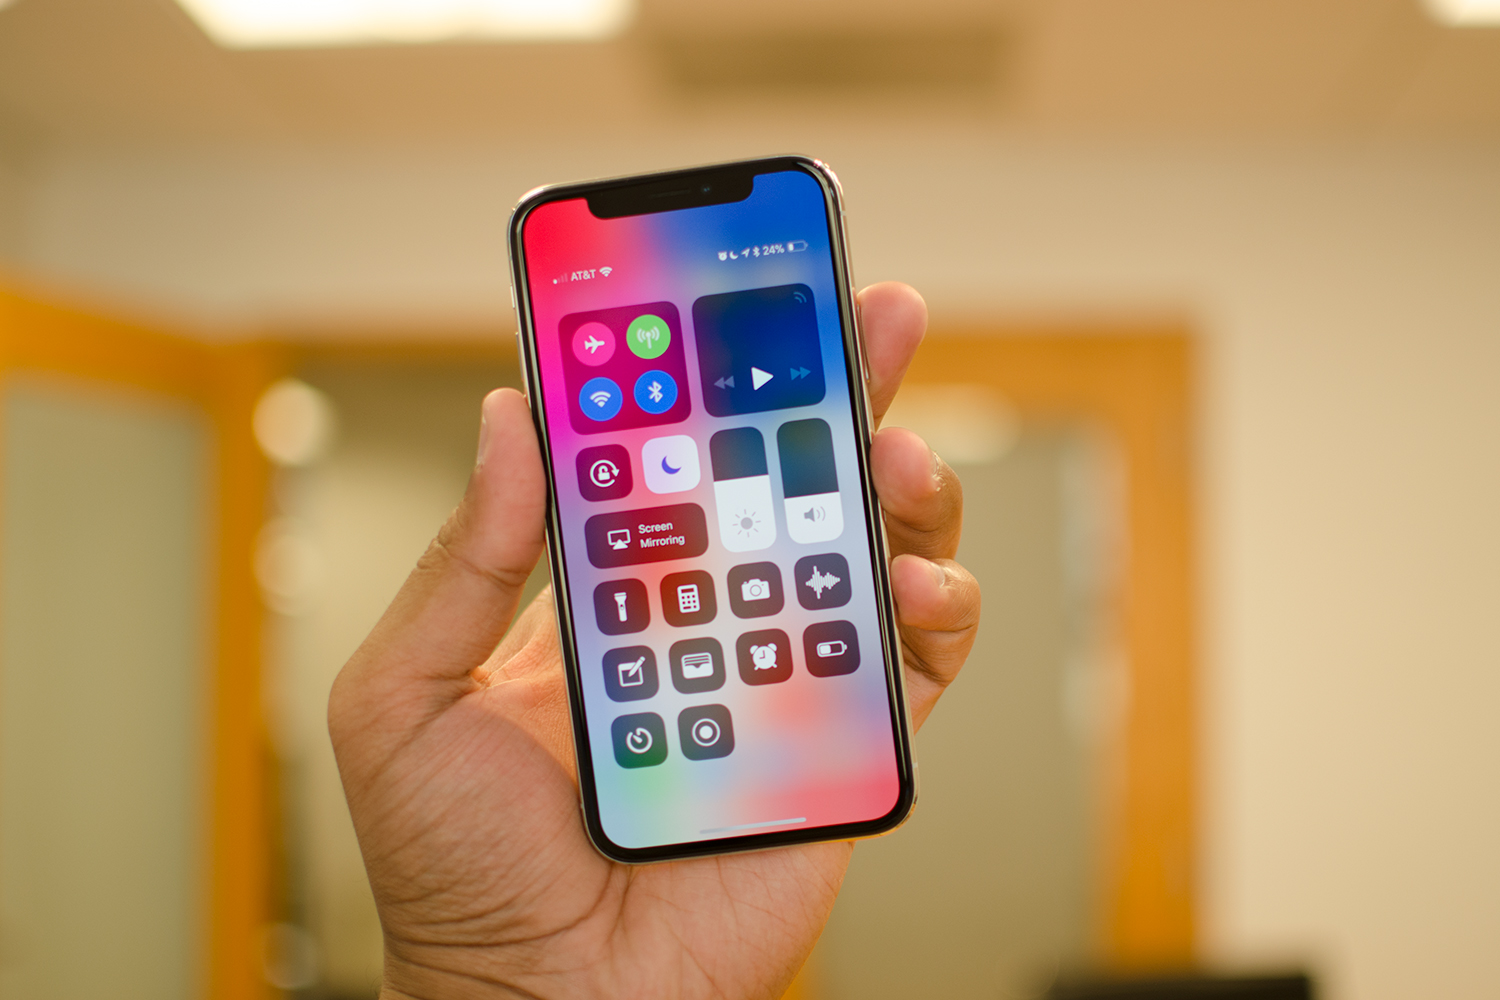 iPhone X Vs iPhone 8 Plus: What's The Difference?